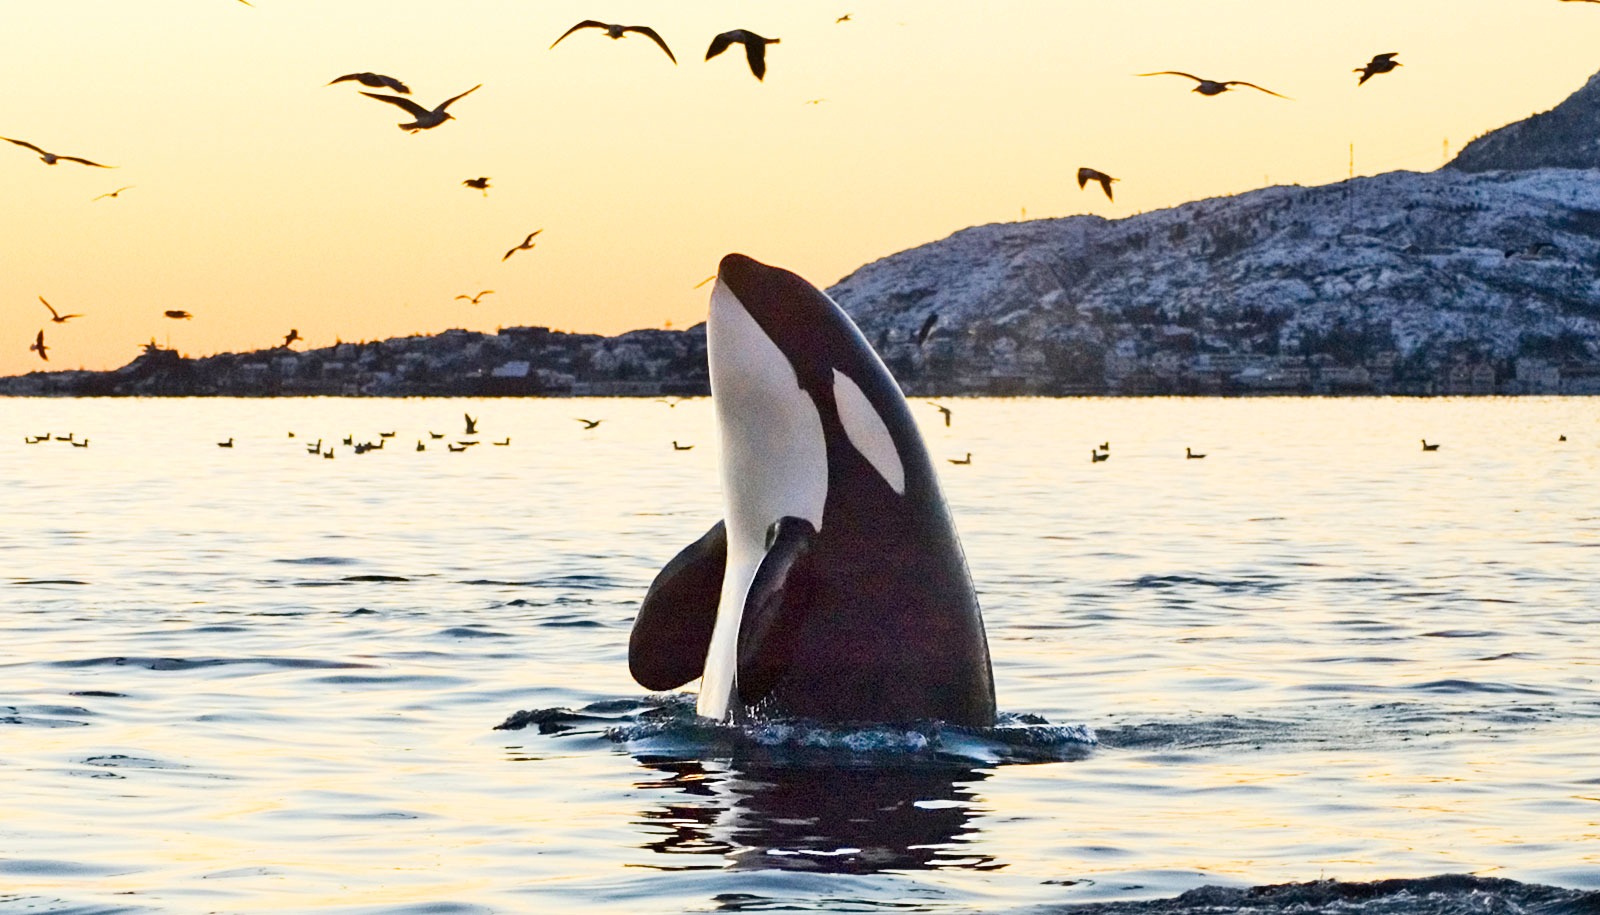 An orca comes out of the water at sunset with birds flying above.